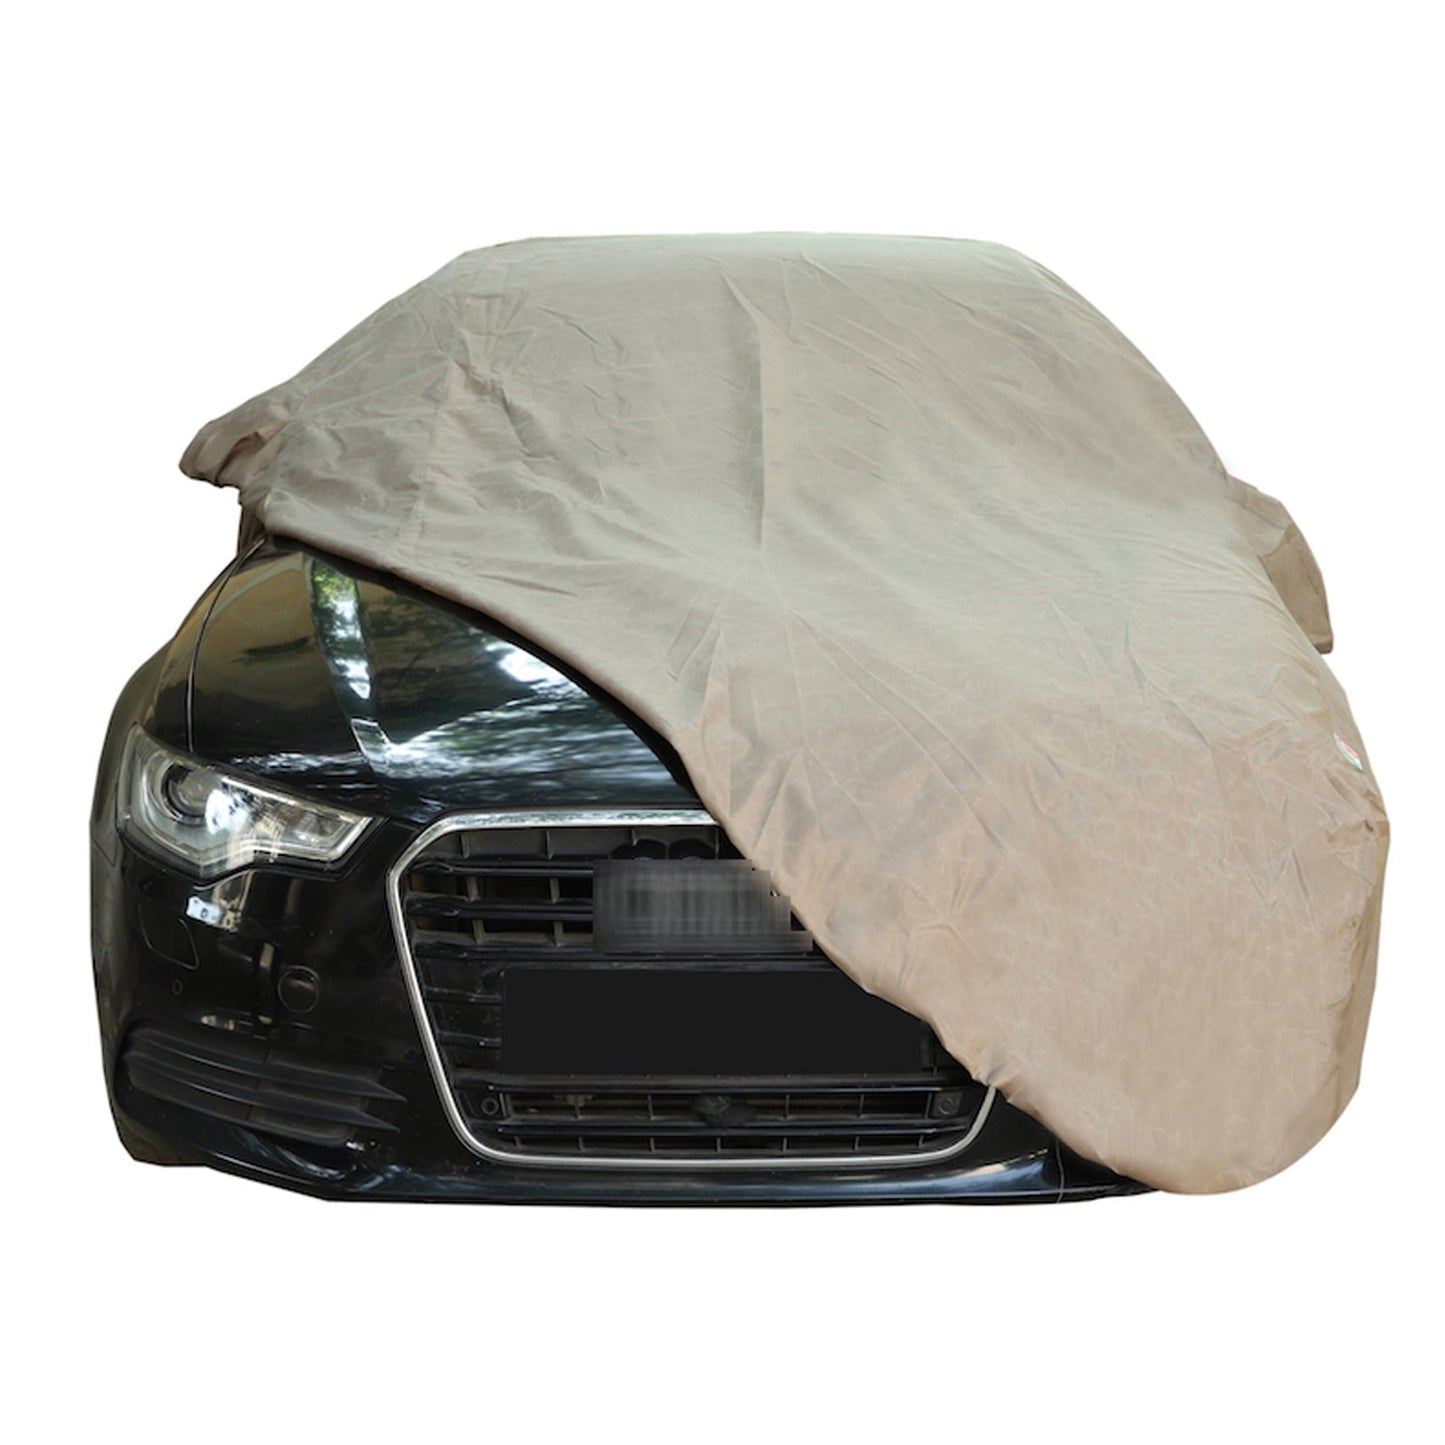 Oshotto Brown 100% Waterproof Car Body Cover with Mirror Pockets For Tata Aria